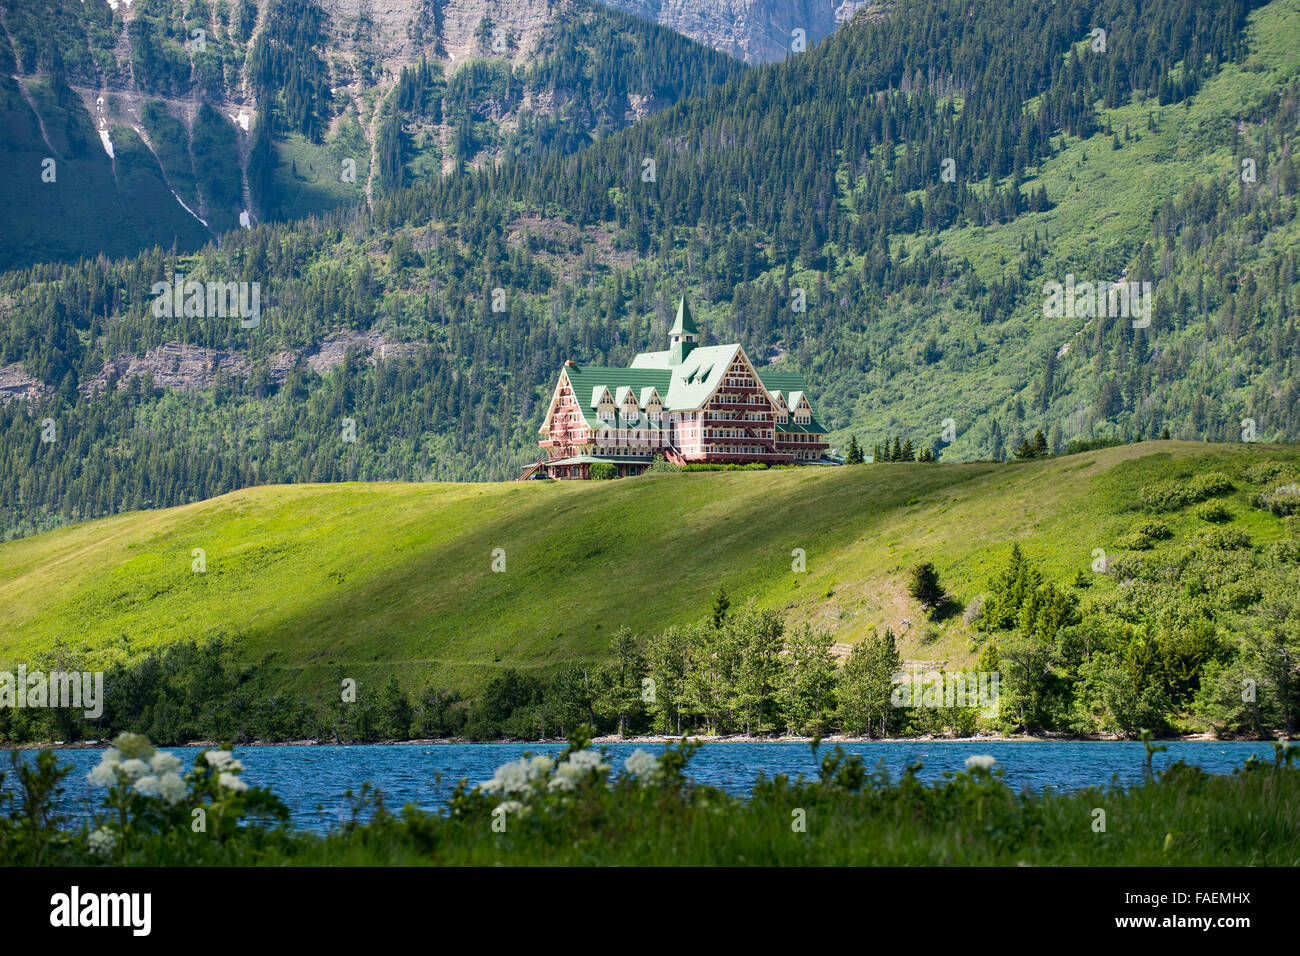 Iconic Prince of Wales Hotel Waterton National Park Alberta Canada Stock Photo